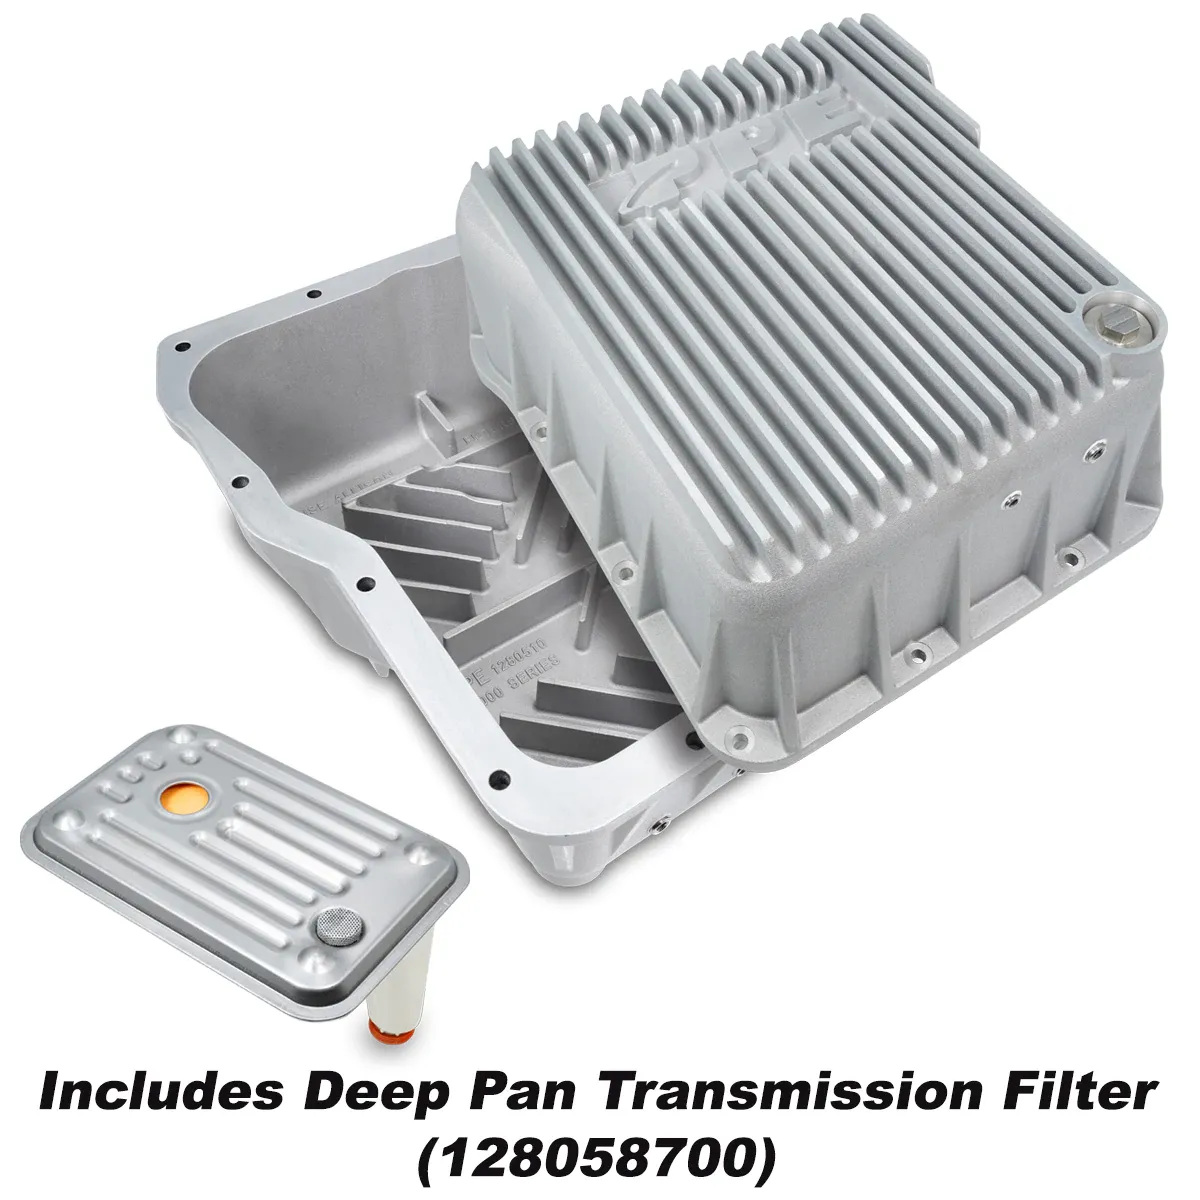 PPE - PPE Raw Heavy Duty Deep Transmission Pan For 2001-2019 GM 6.6L Duramax Diesel